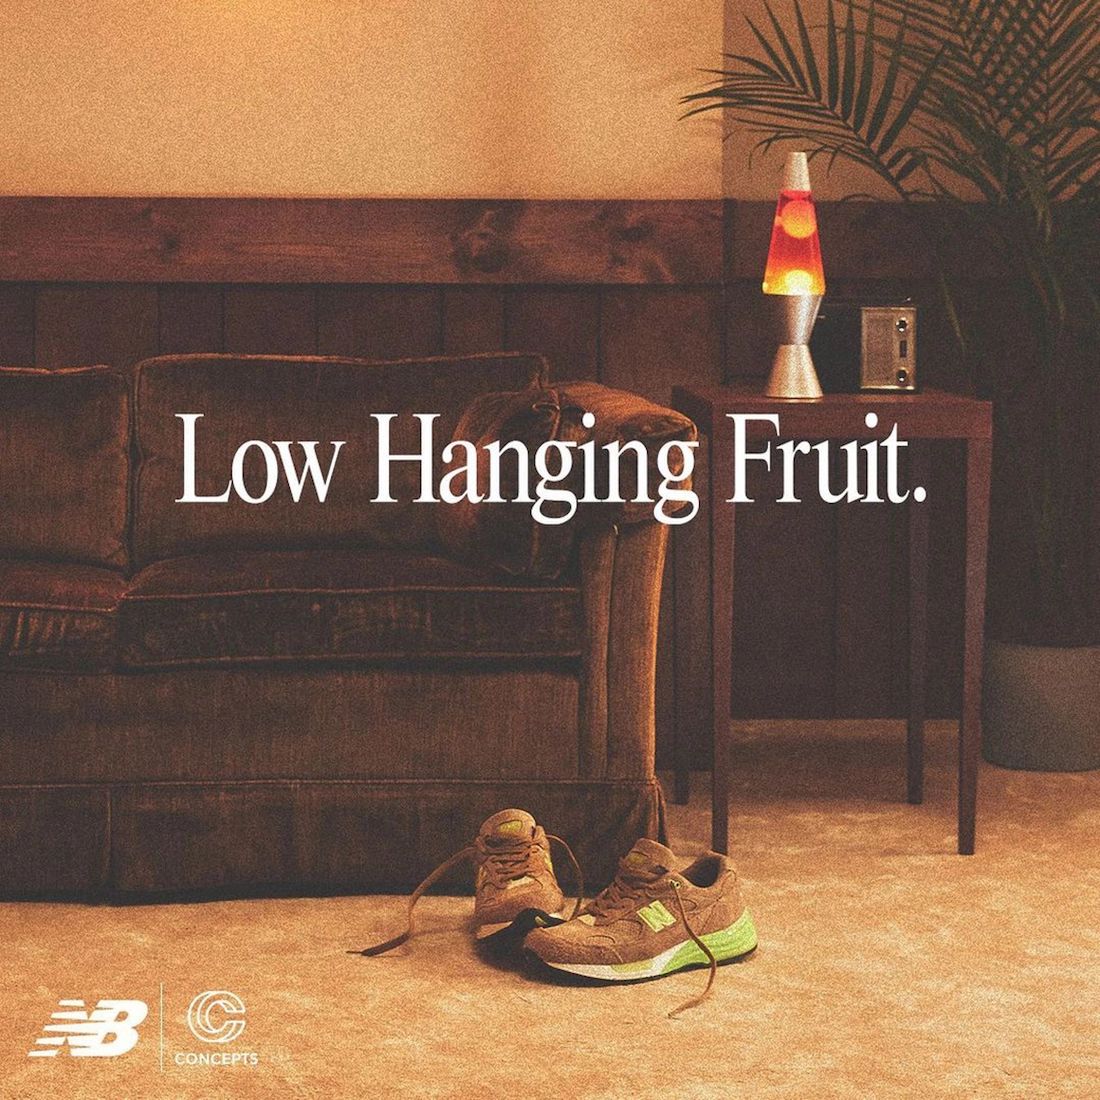 Concepts New Balance 992 Low Hanging Fruit Kiwi Strawberry Release Date Info